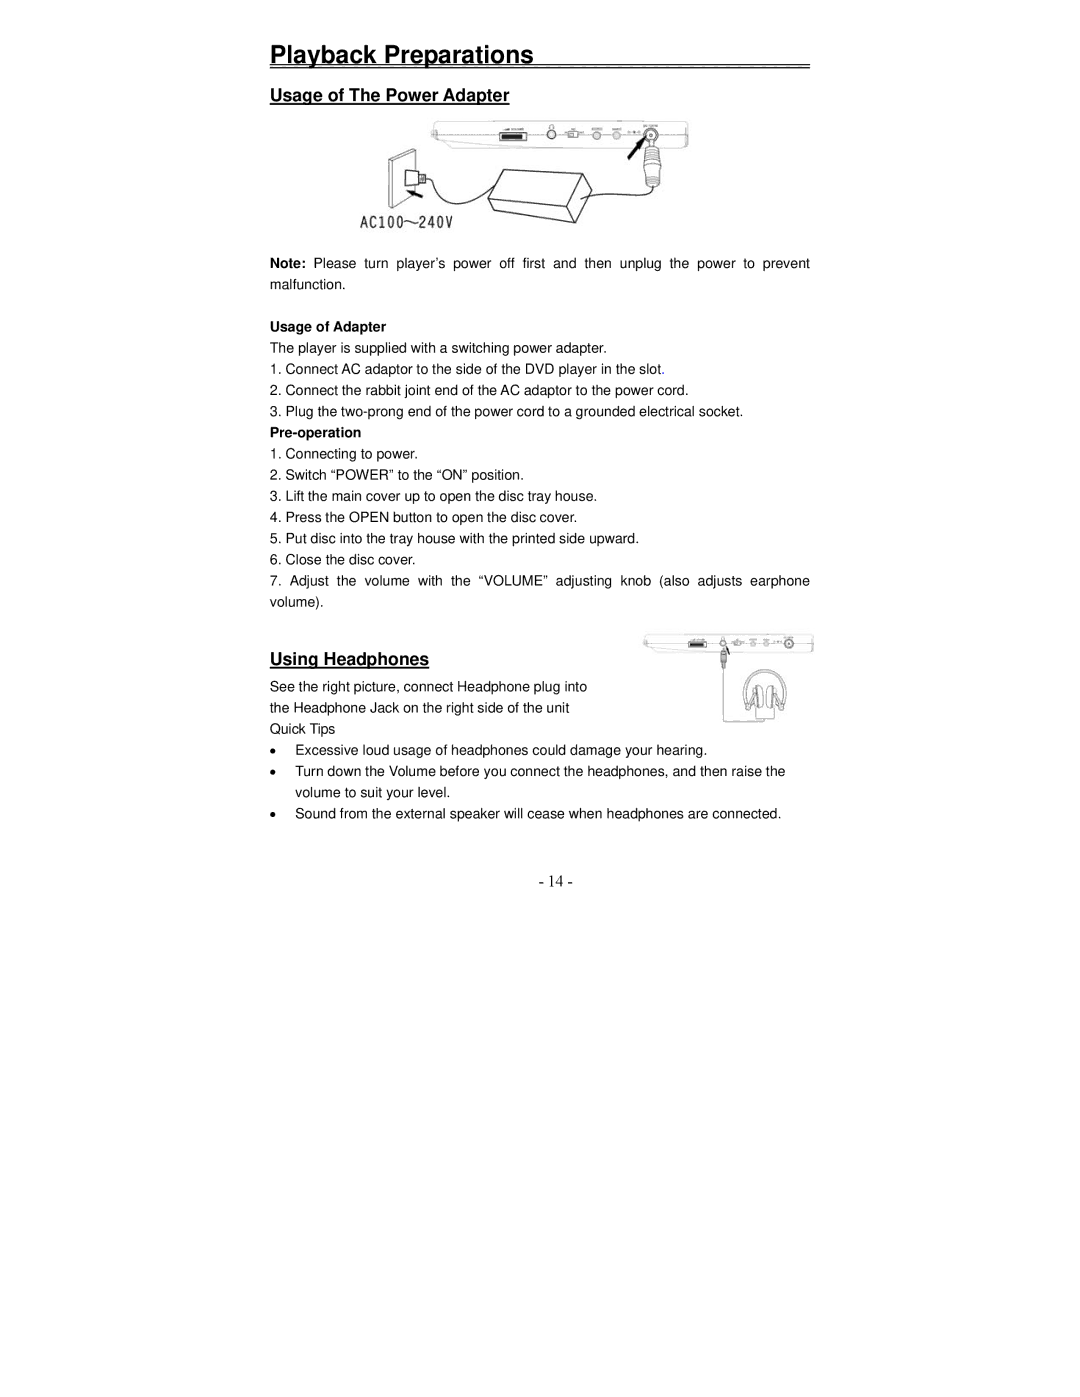 Polaroid PDV-1002A manual Usage of The Power Adapter, Using Headphones, Usage of Adapter, Pre-operation 